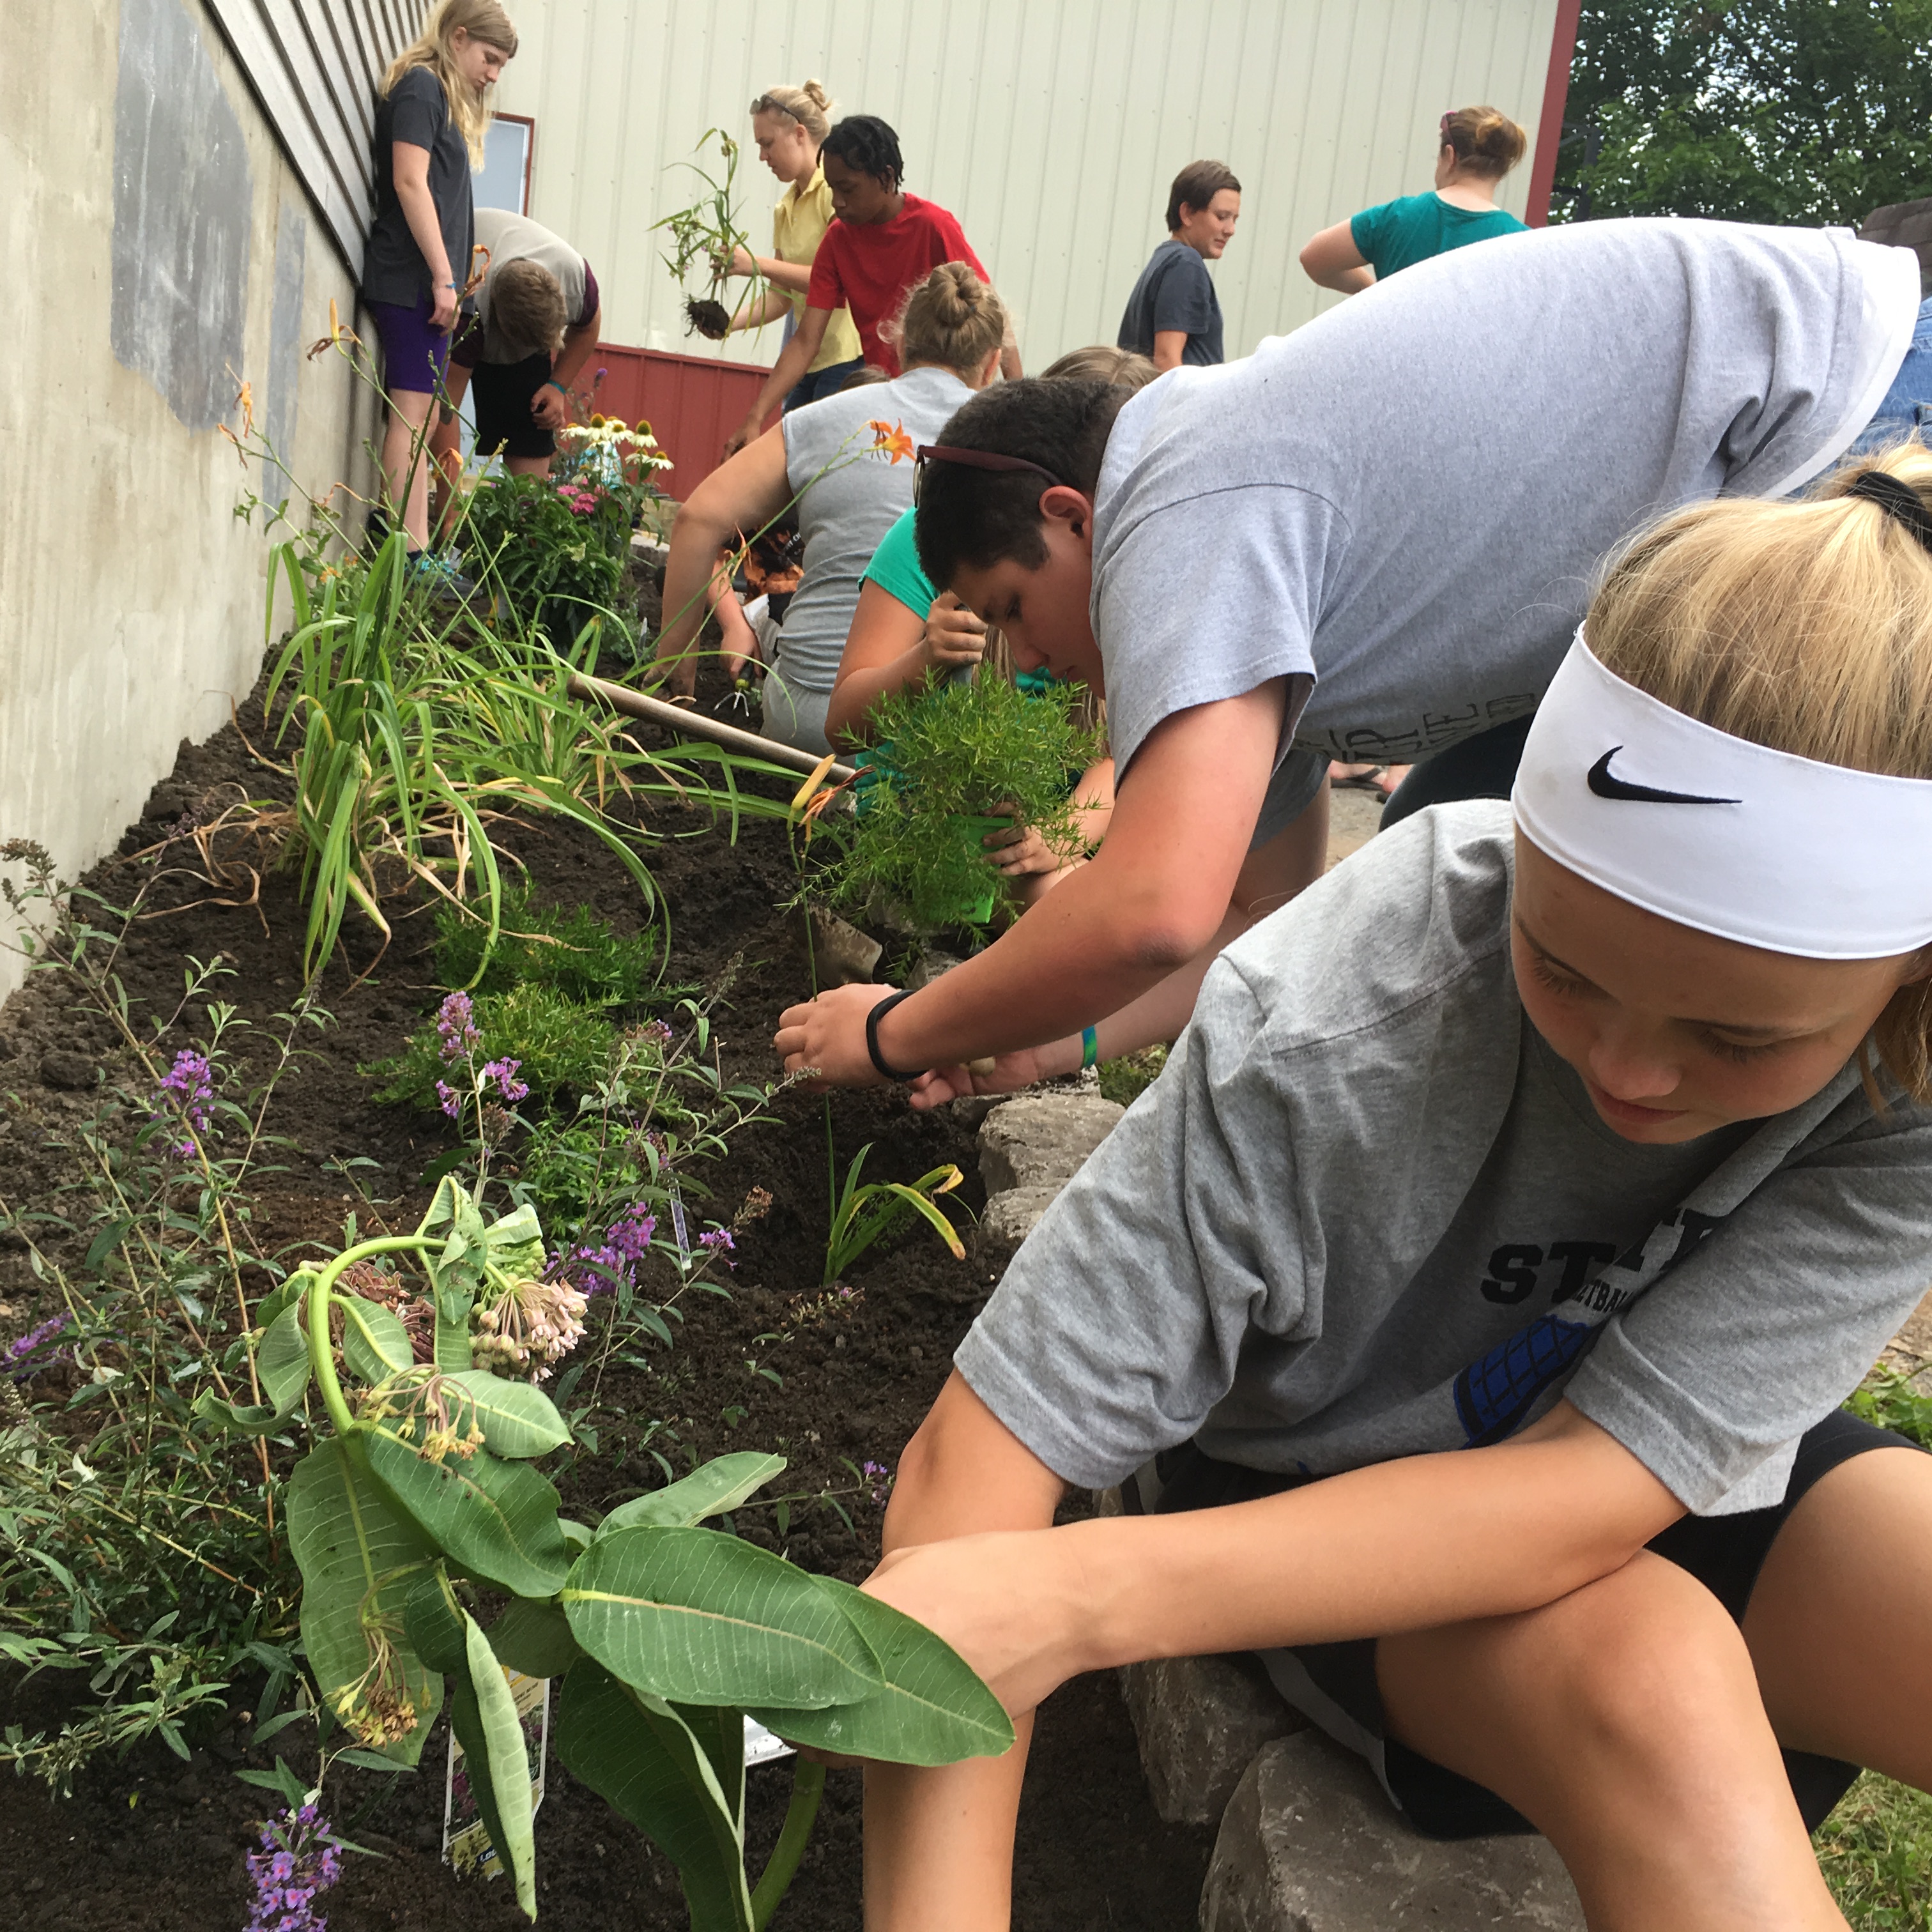 Students have their hands in dirt while planting a raised wildflower garden along the side of a building